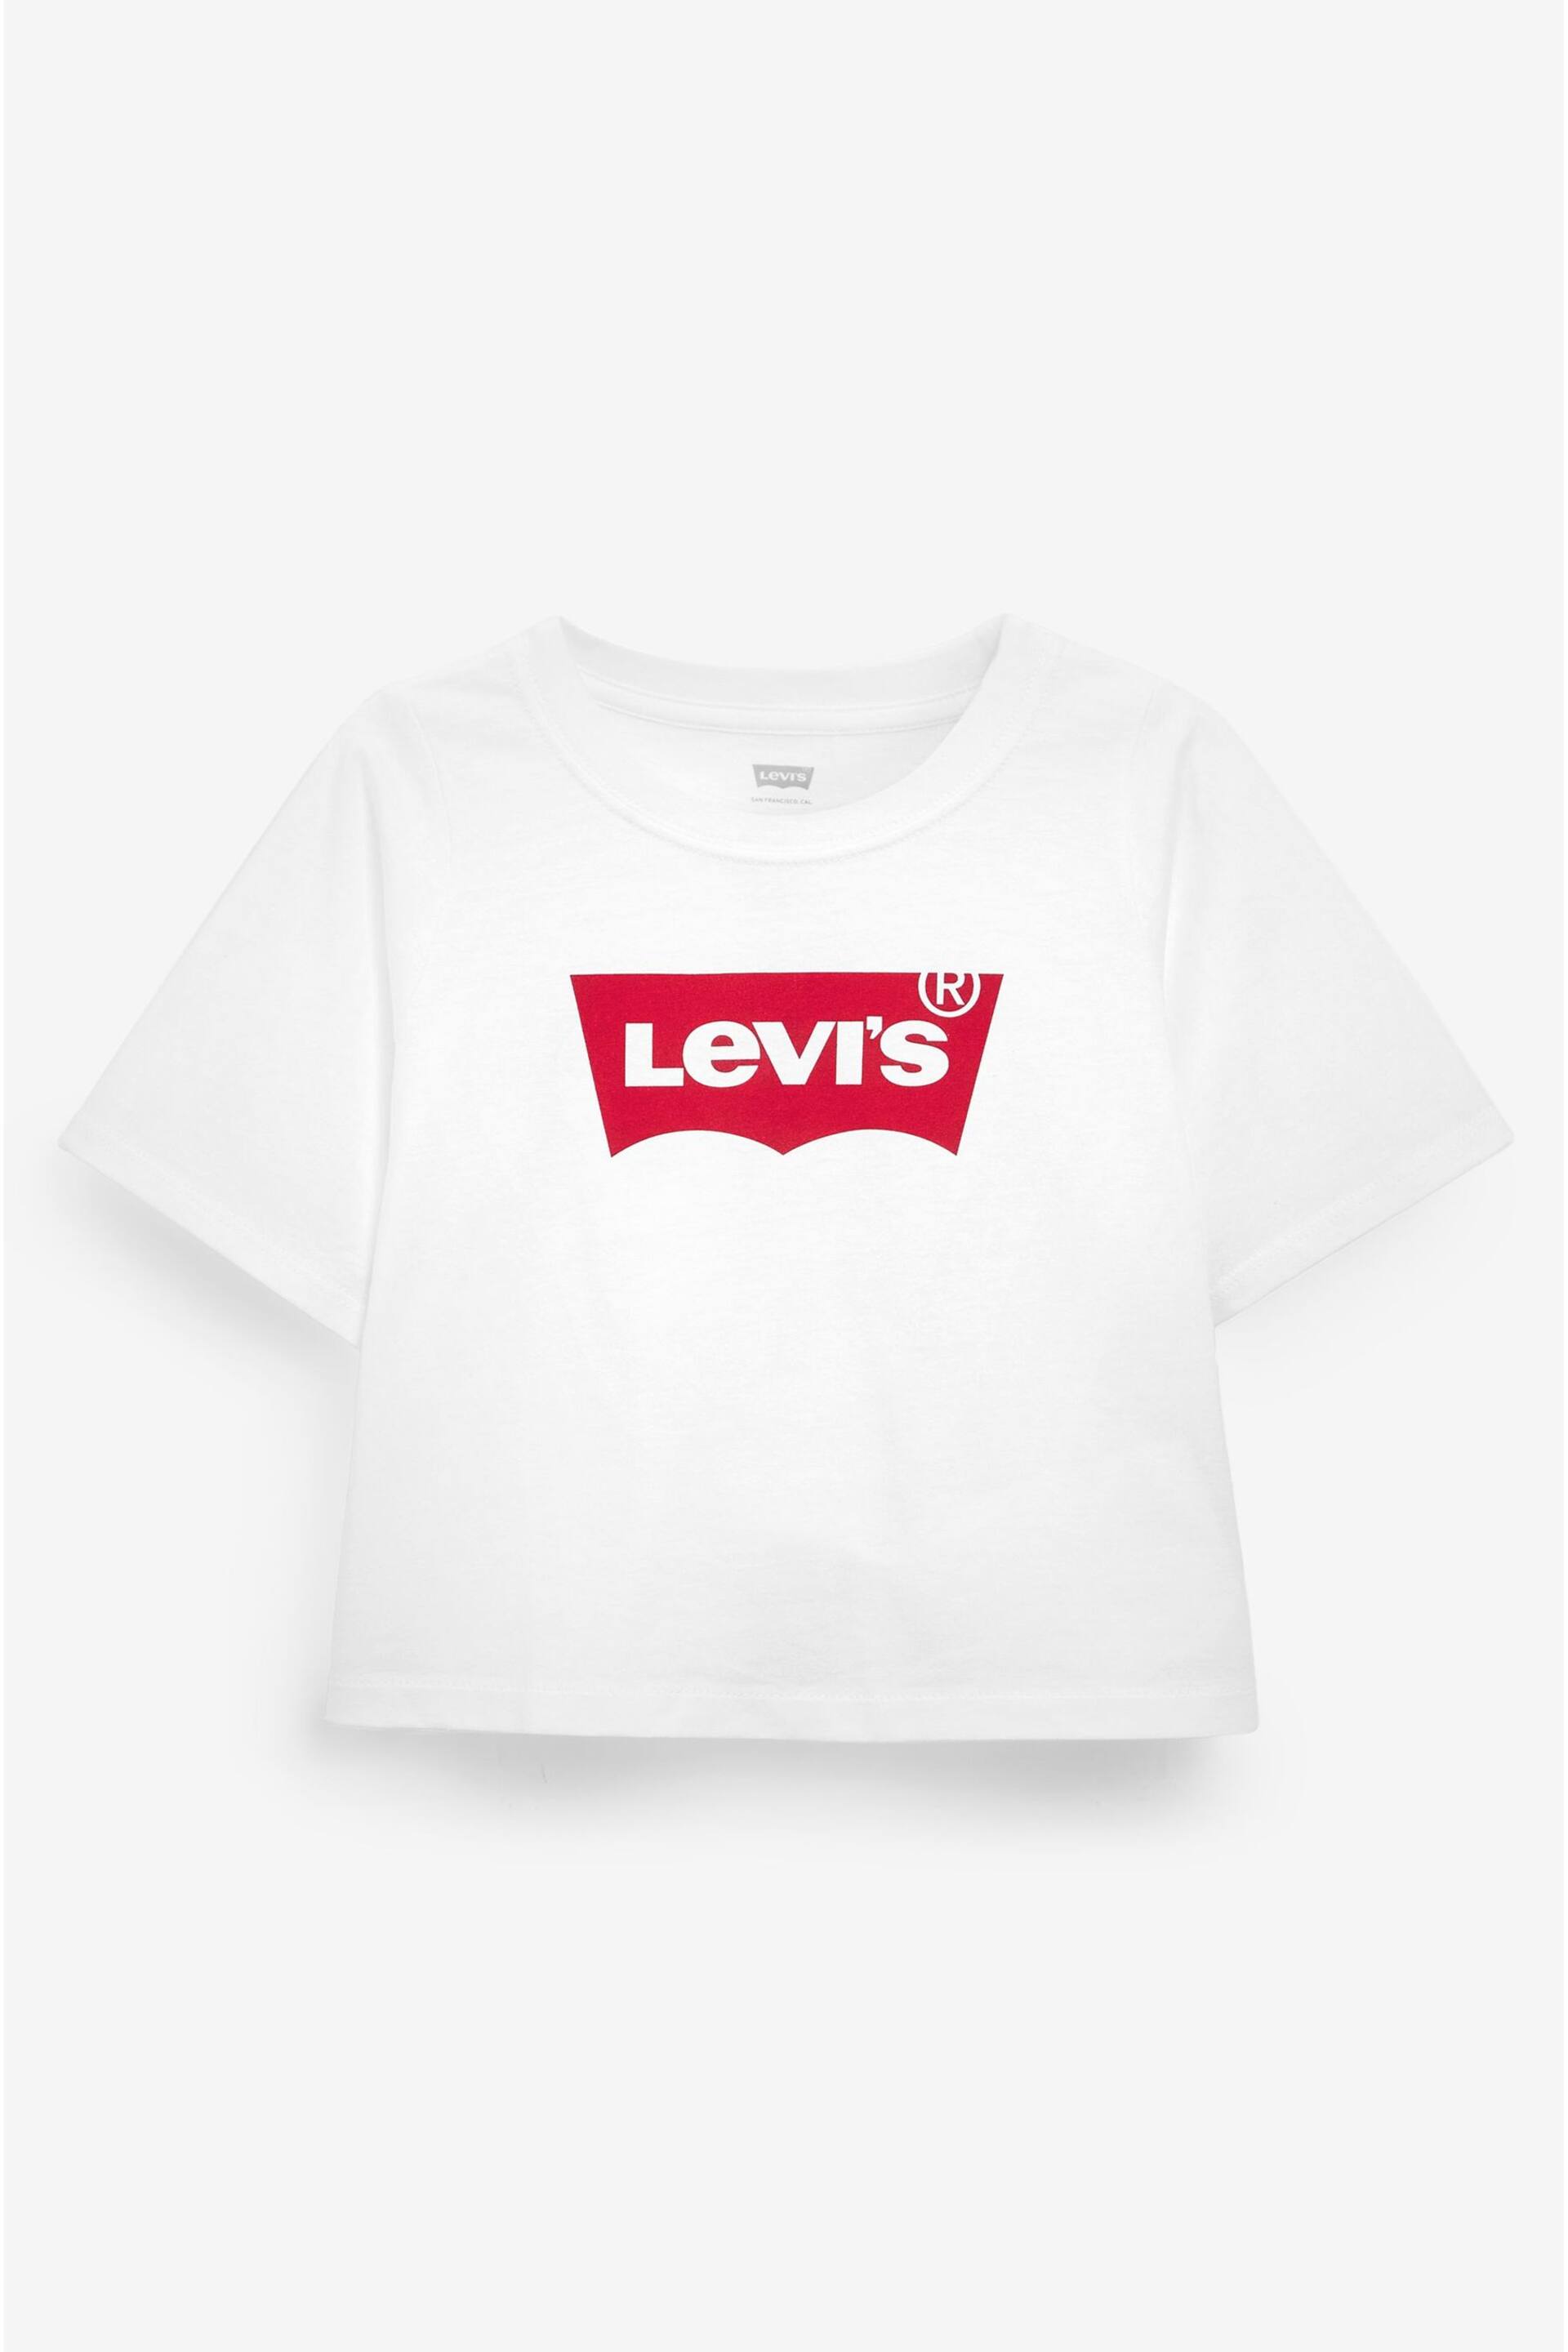 Levi's® White High Rise Cropped Batwing Logo T-Shirt - Image 4 of 5